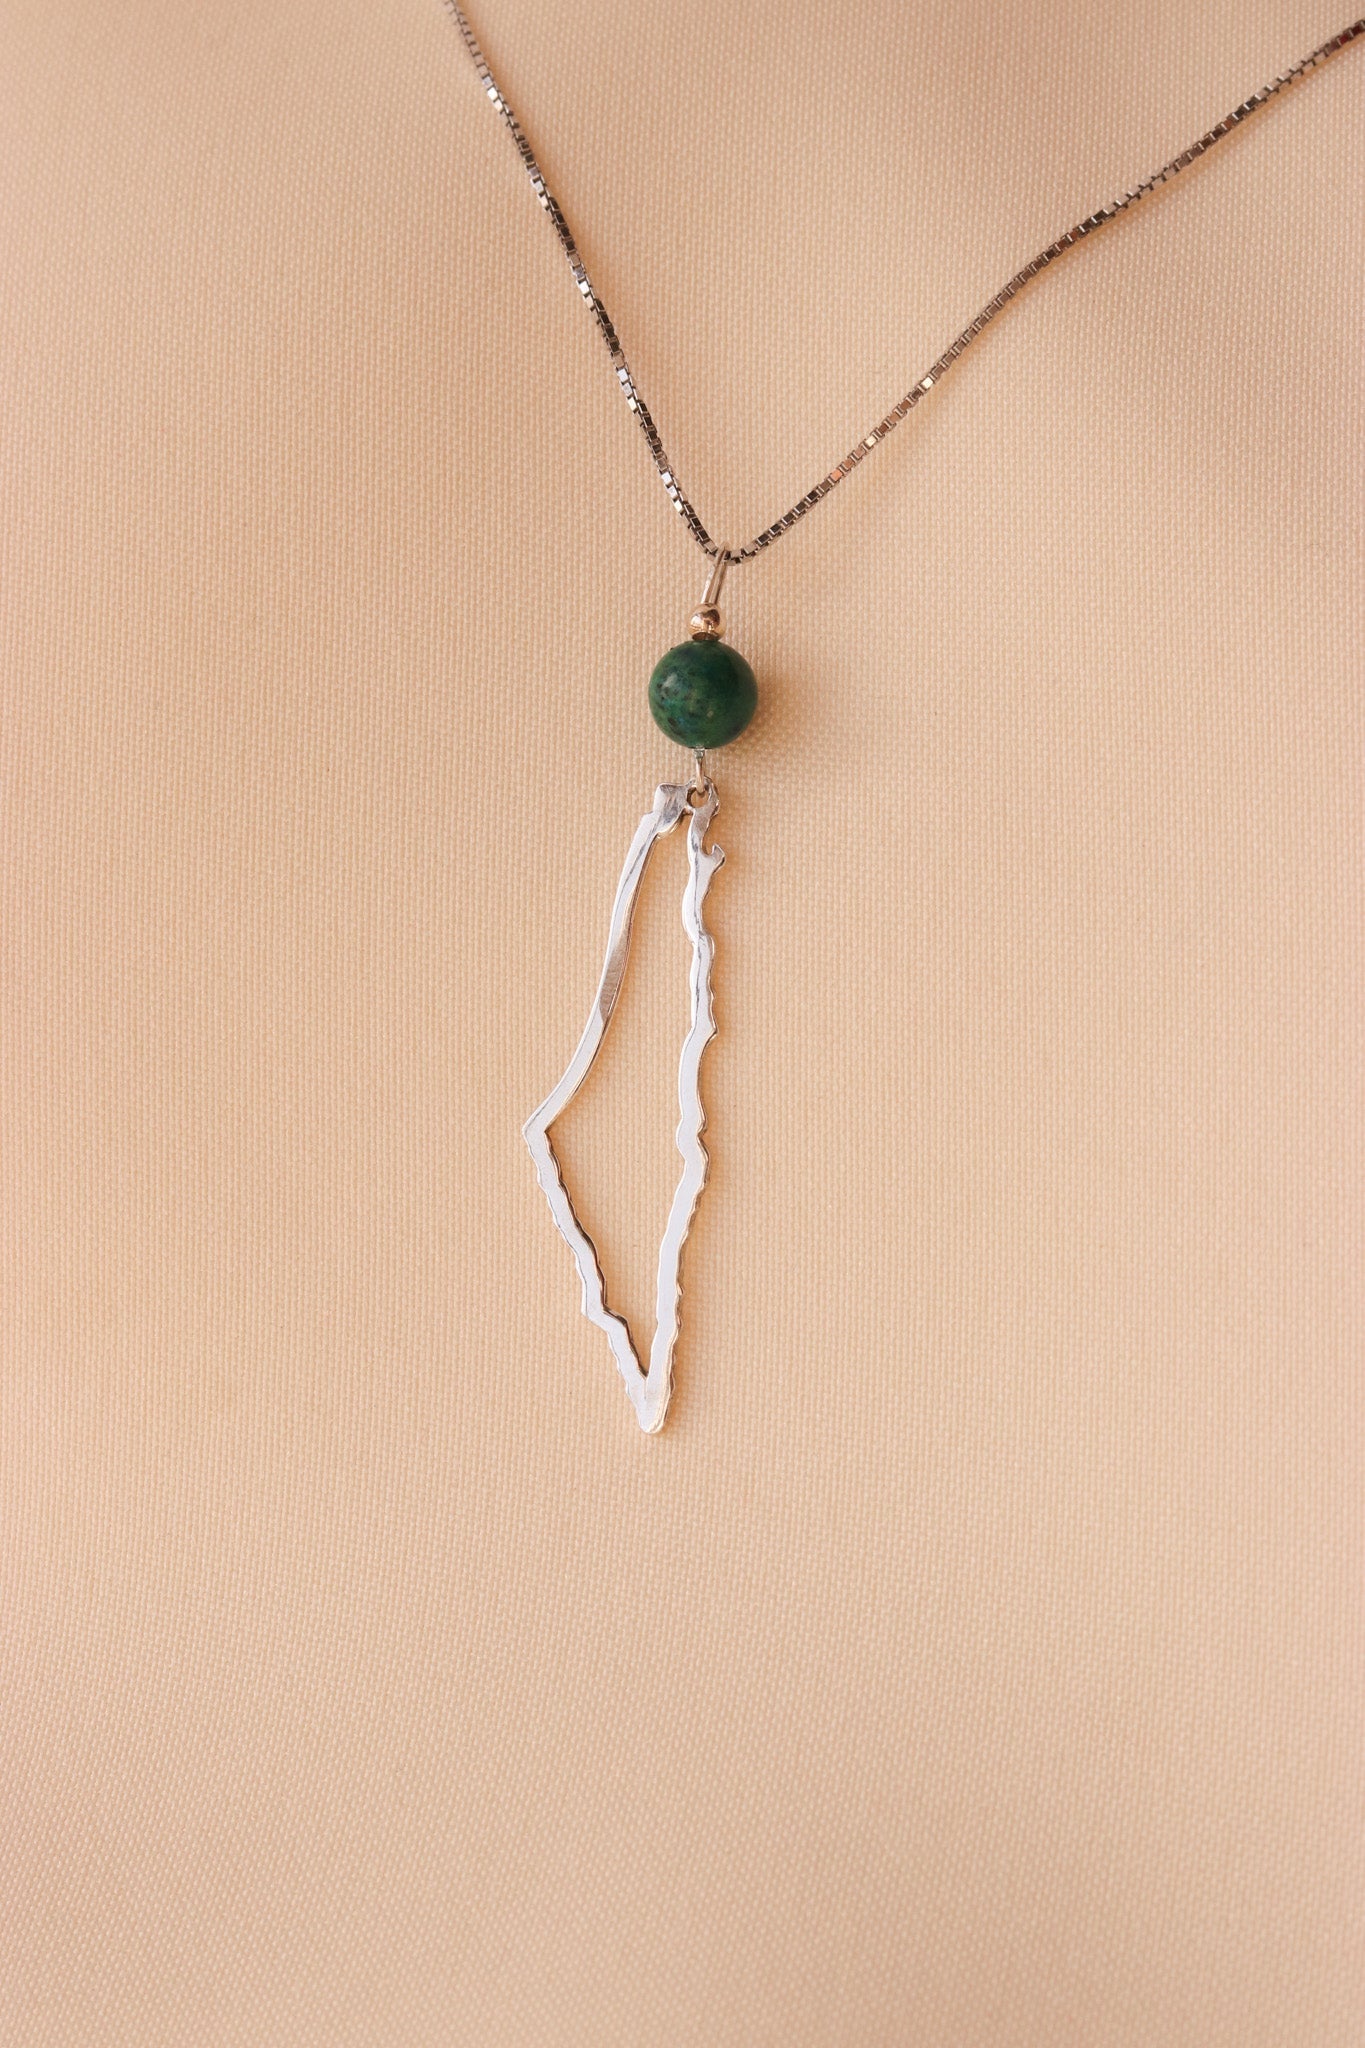 Palestine map frame necklace with stone